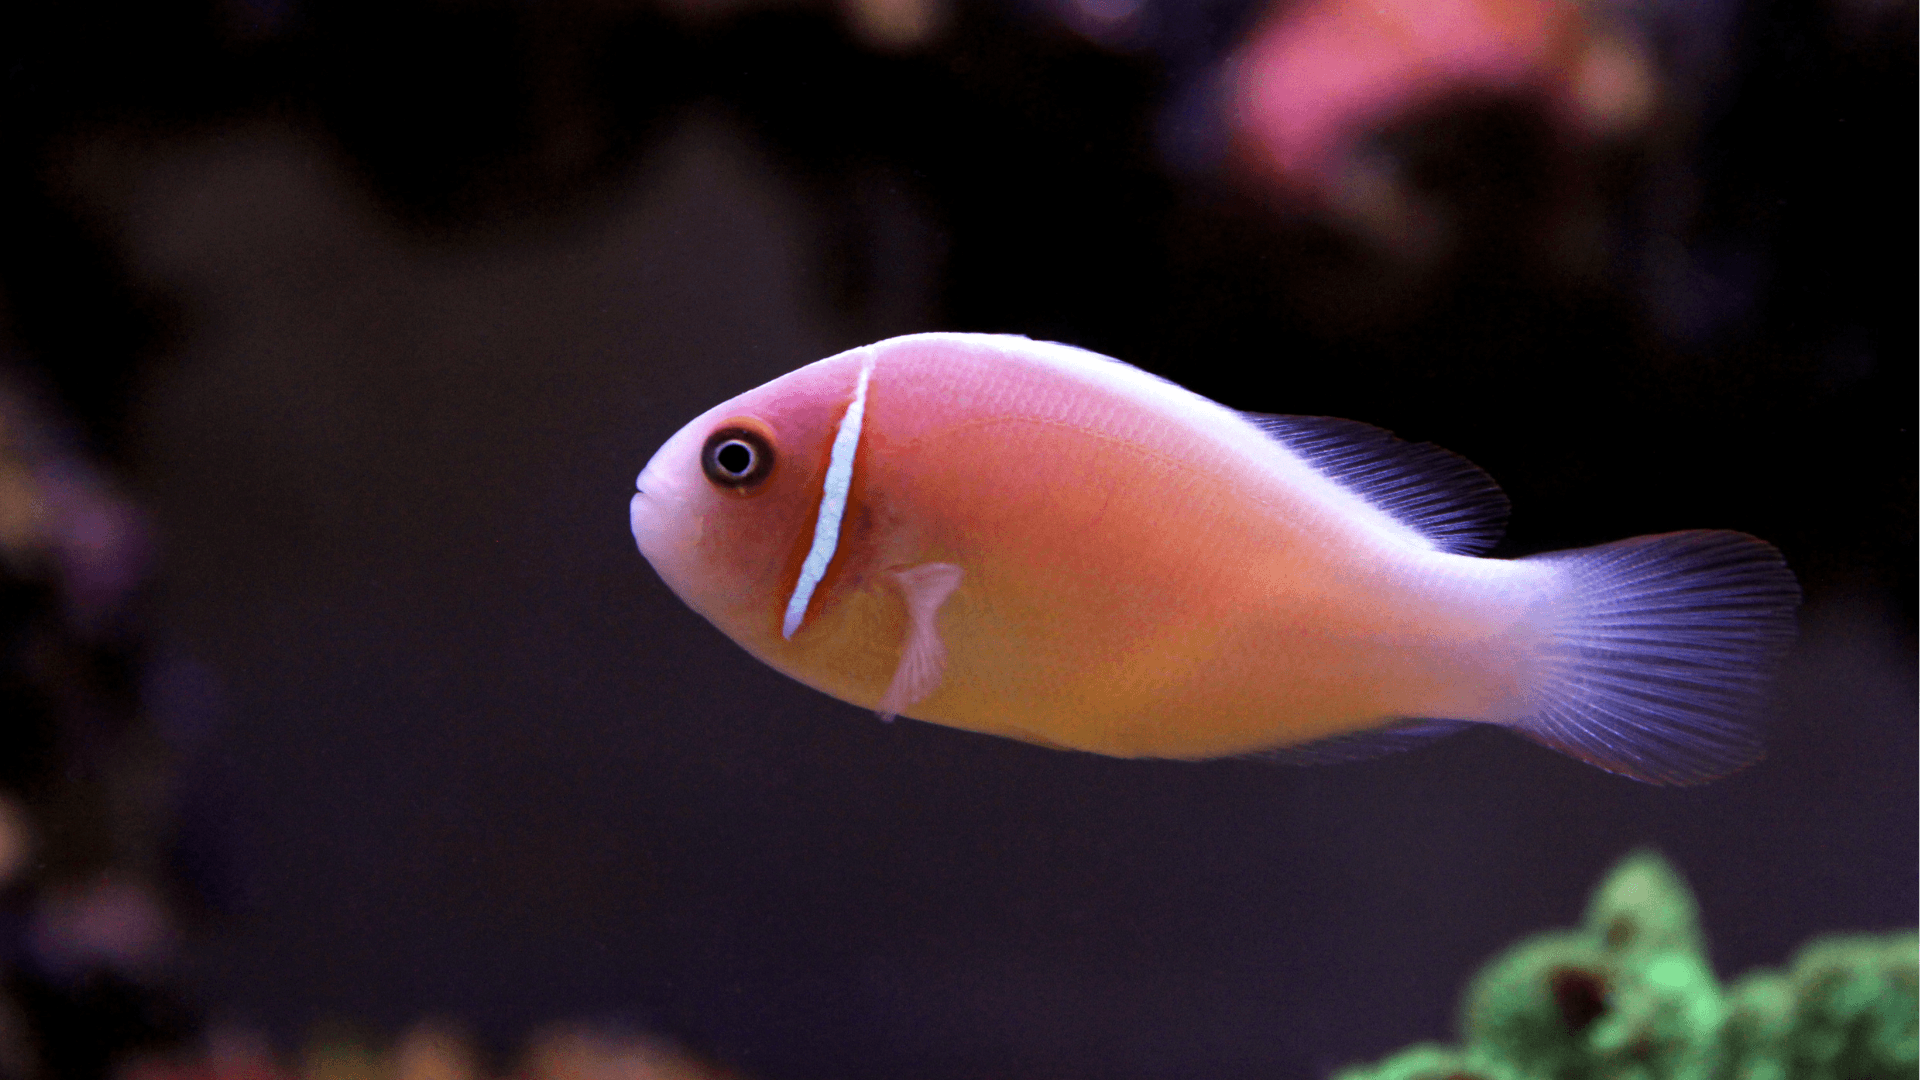 An image of a Pink skunk clownfish